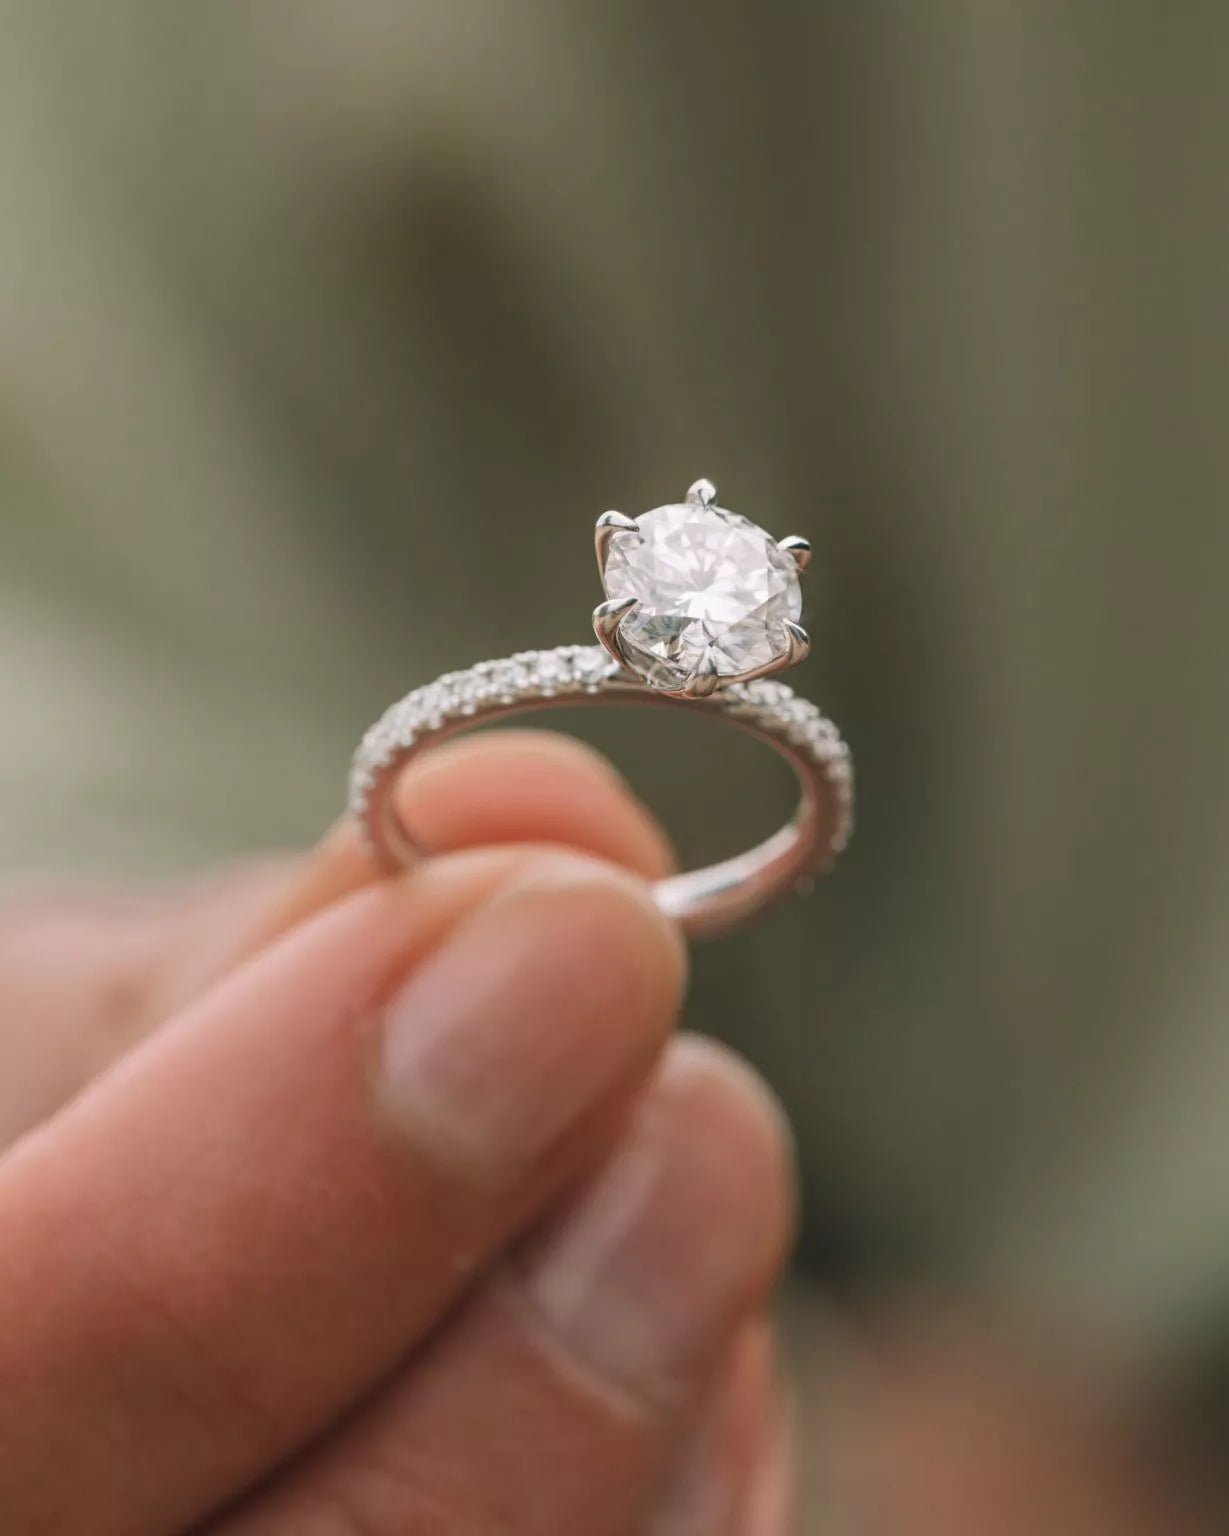 Best diamond engagement rings in Melbourne - Holloway Diamonds